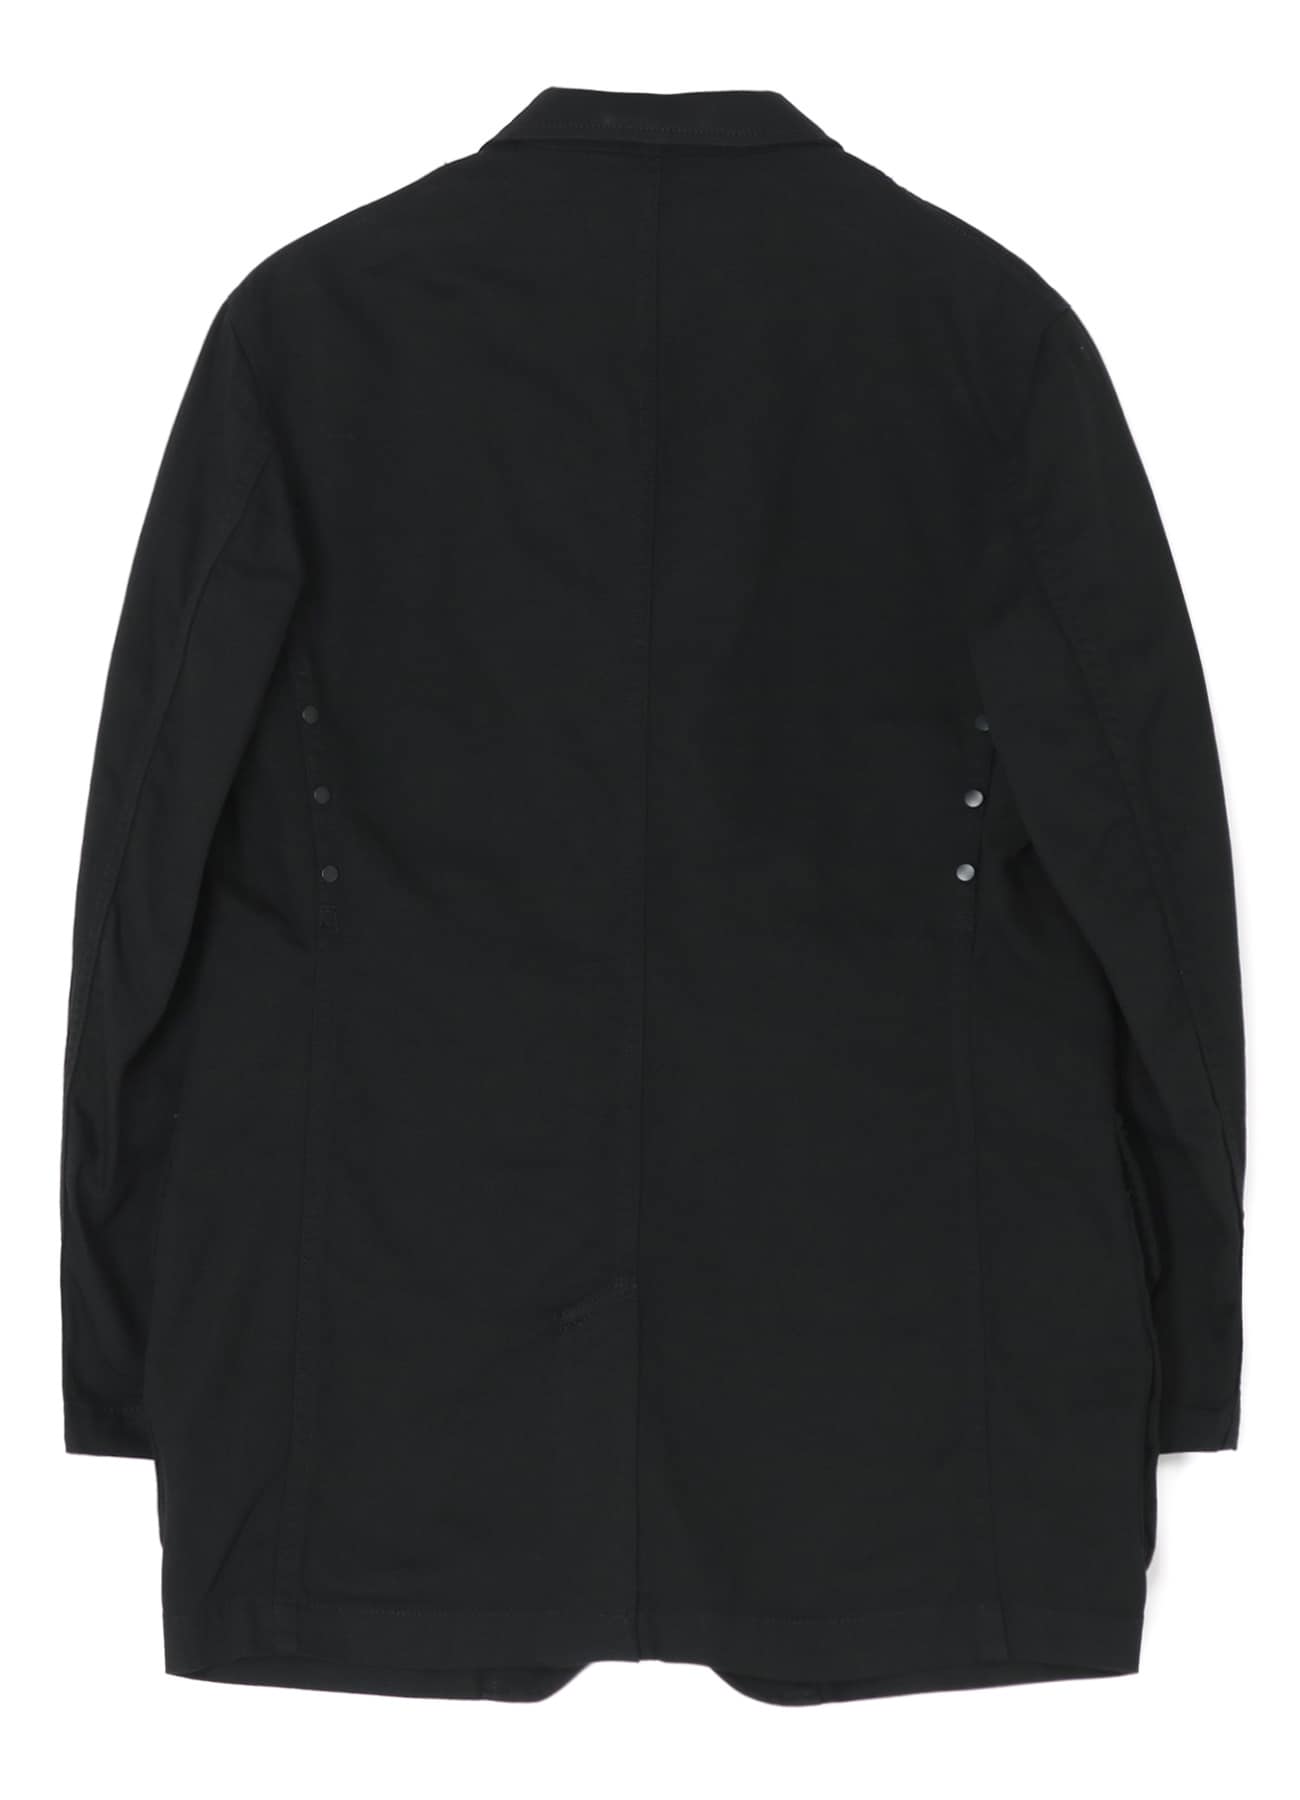 COTTON DRILL SINGLE BREASTED JACKET WITH BOX POCKETS